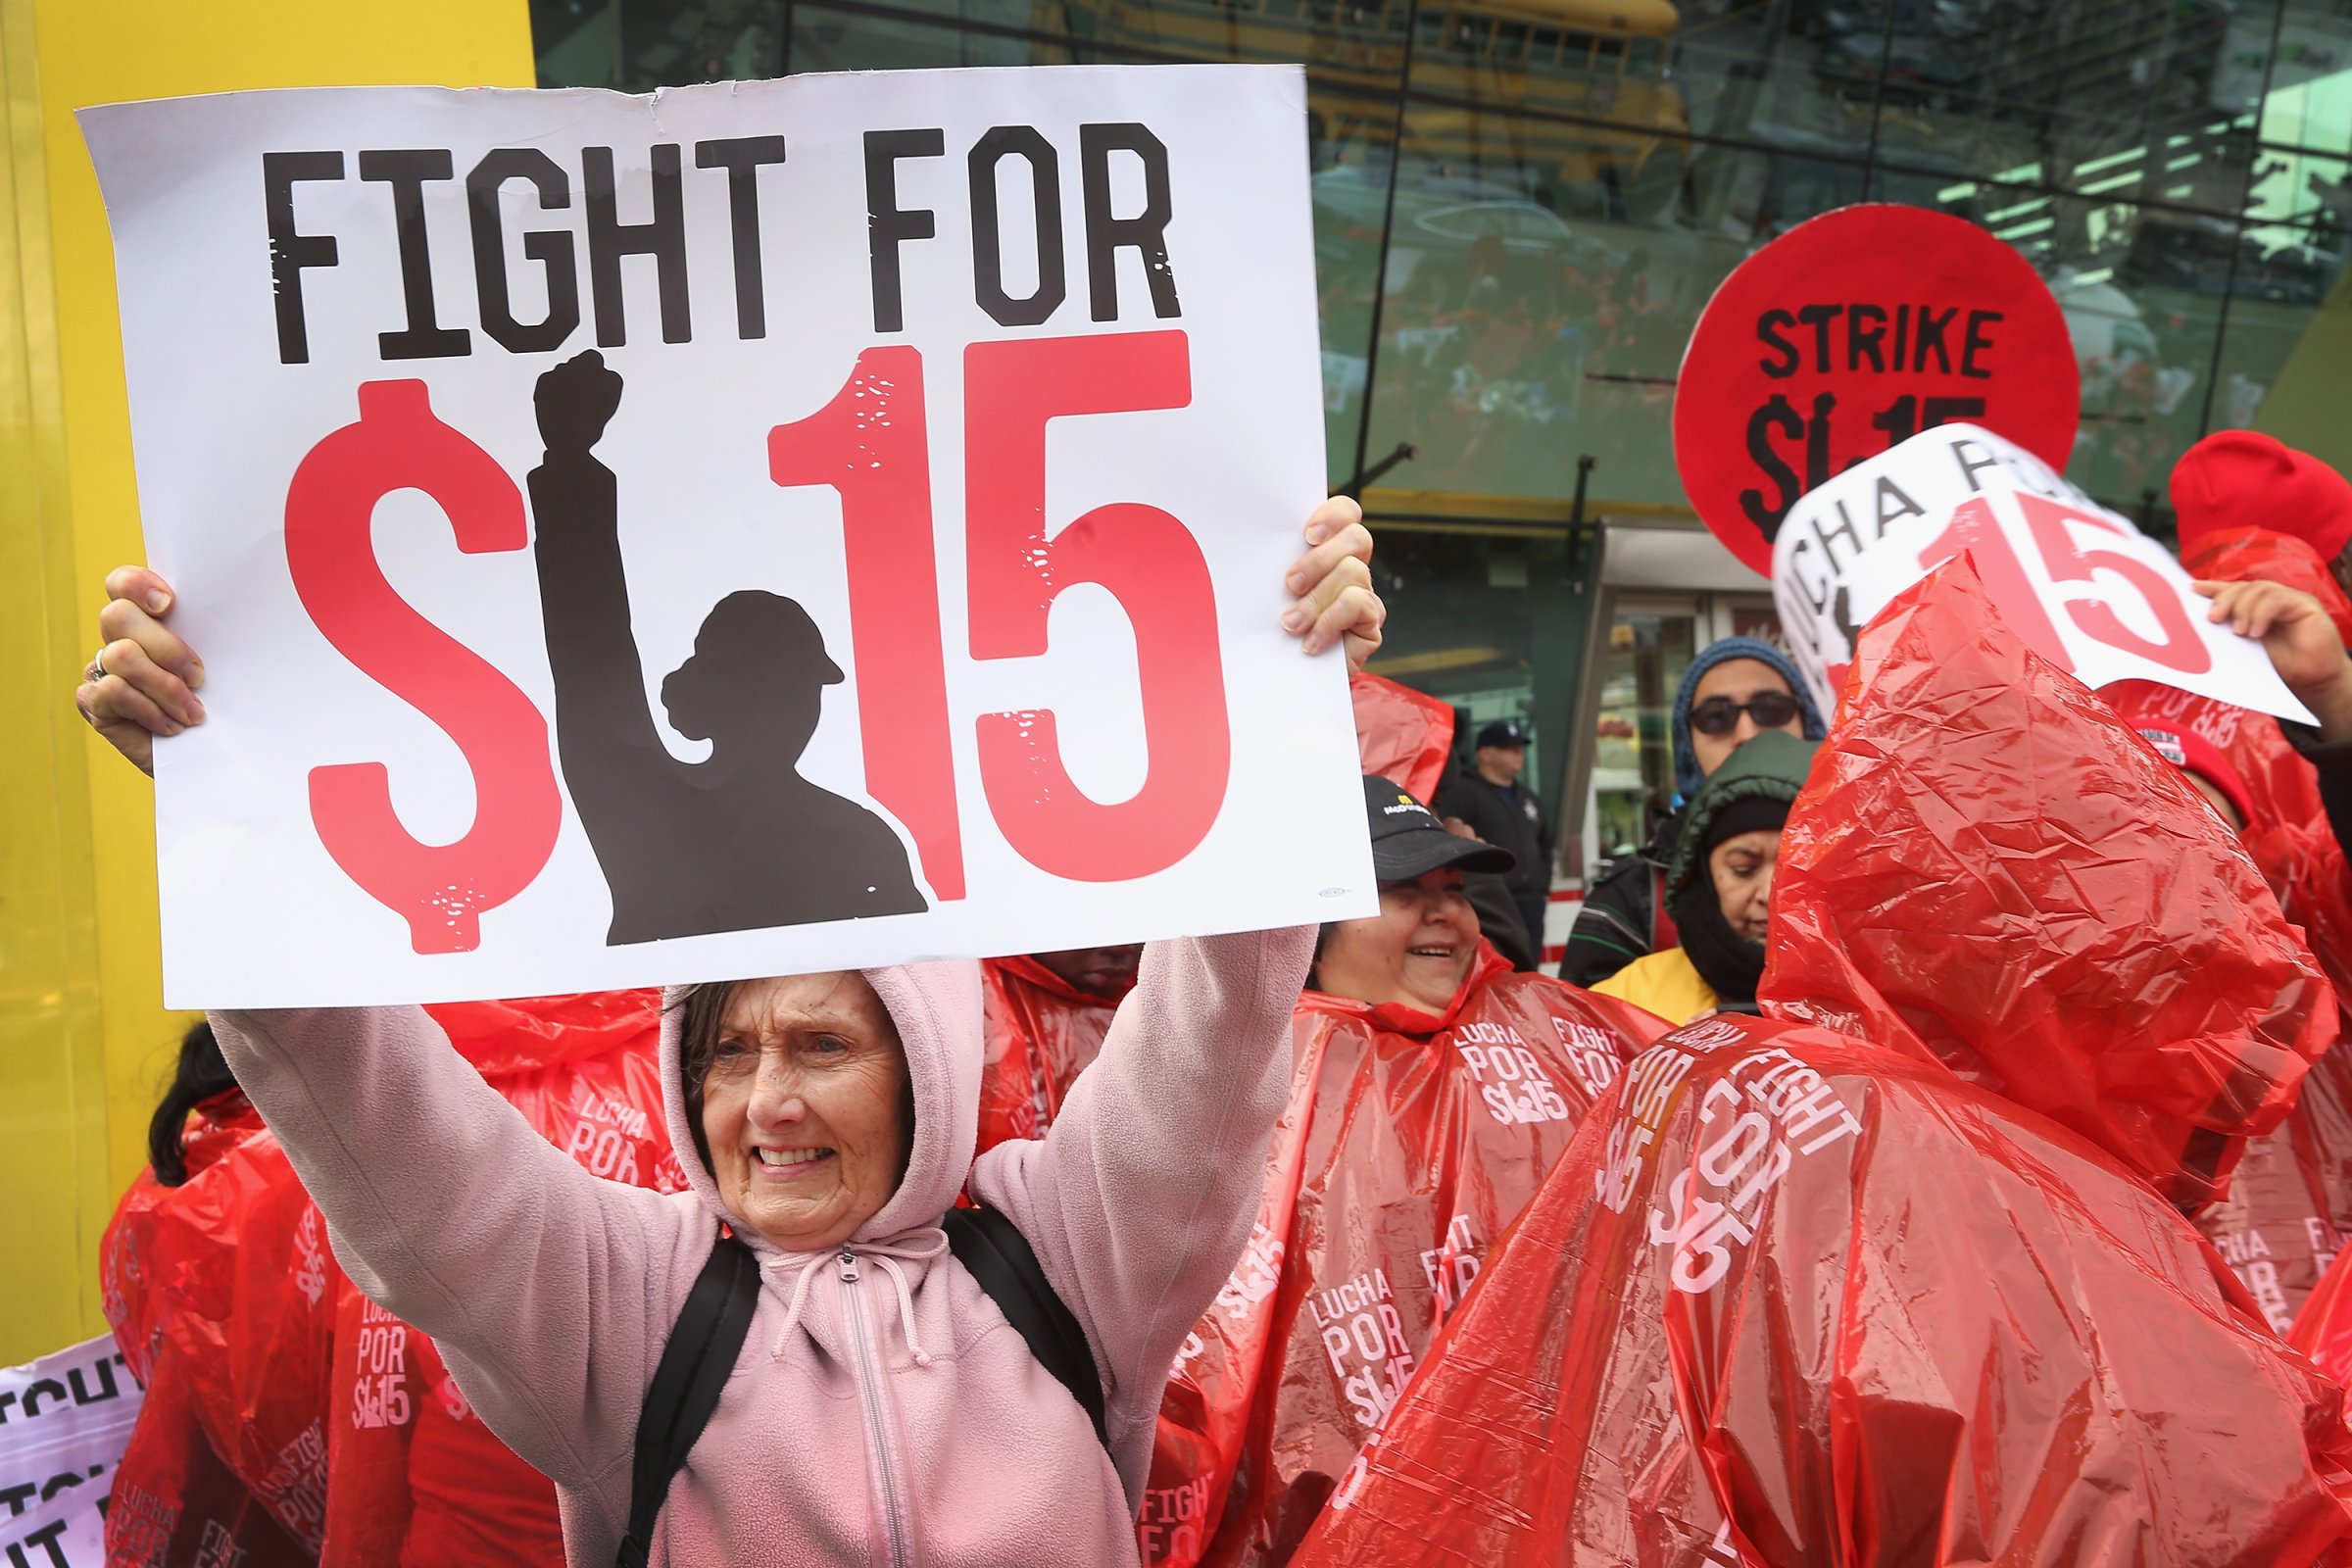 Fast Food Workers Across U.S. Rally For Increased Wages, Unionization